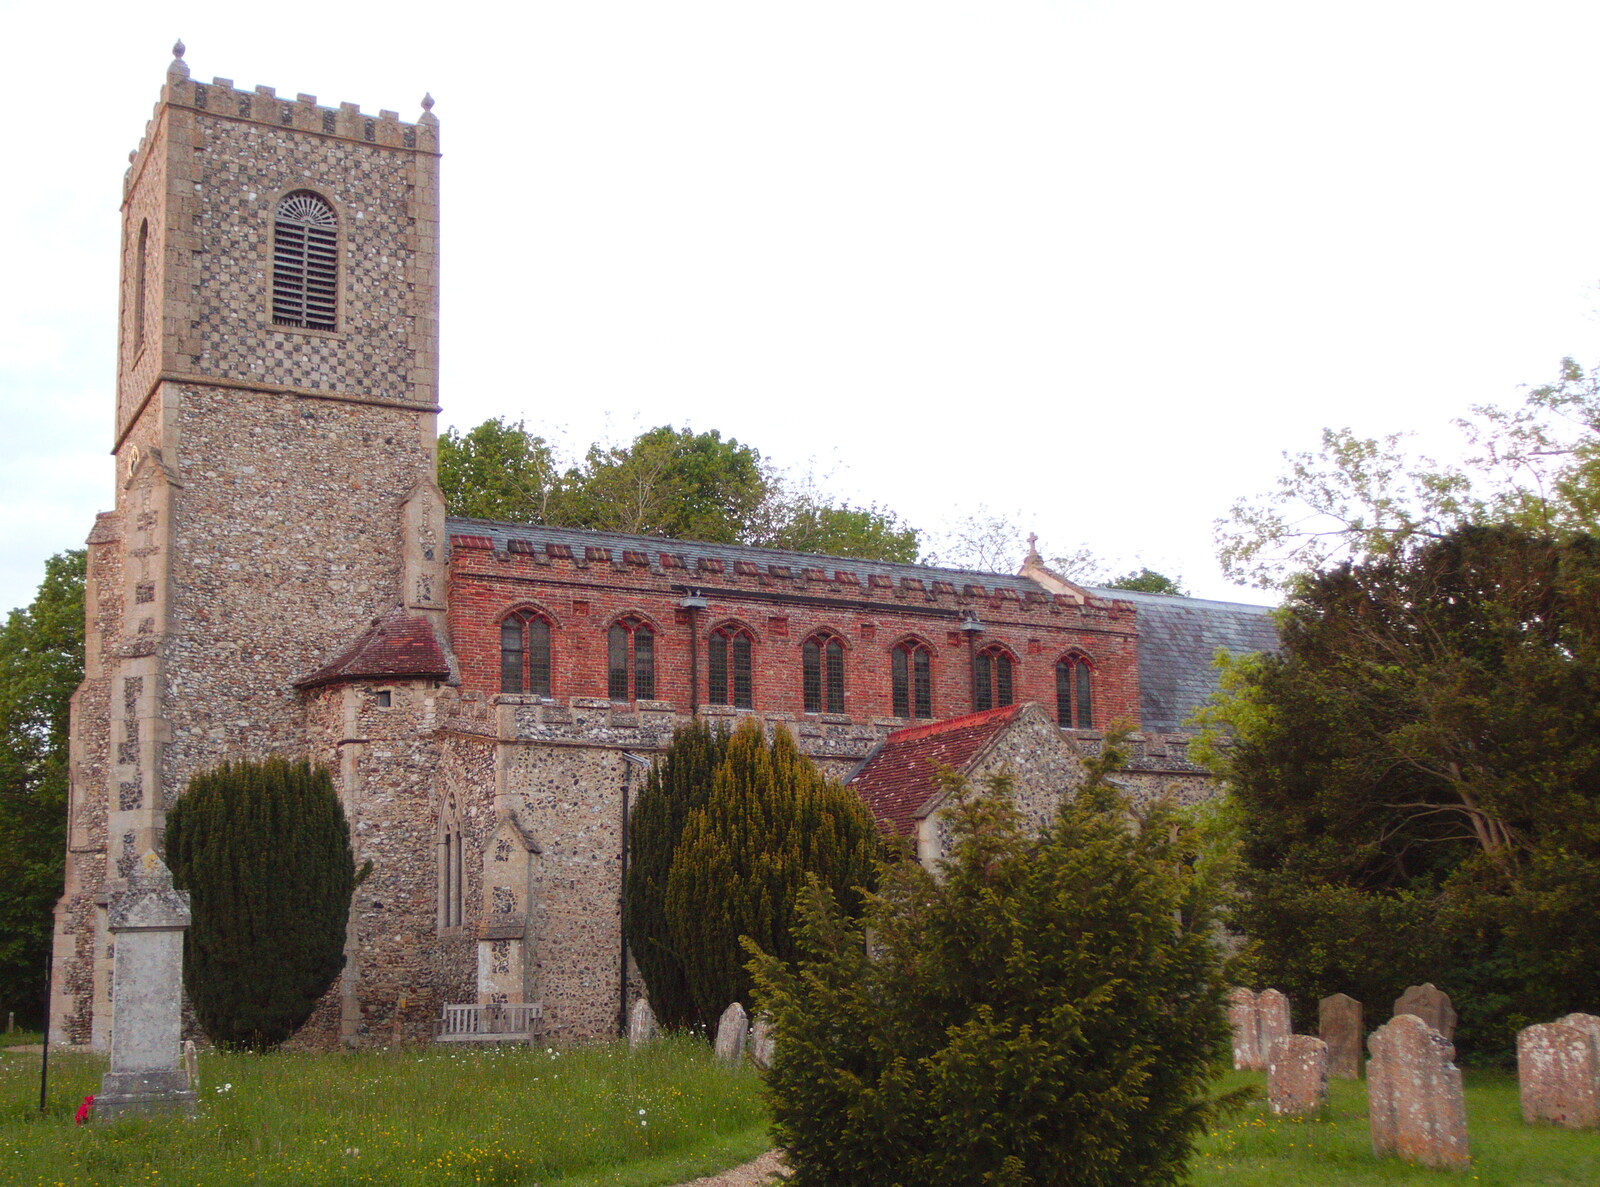 The BSCC at Pulham Market and Hopton, and Lunch in Paddington - 21st May 2019: Hopton Church